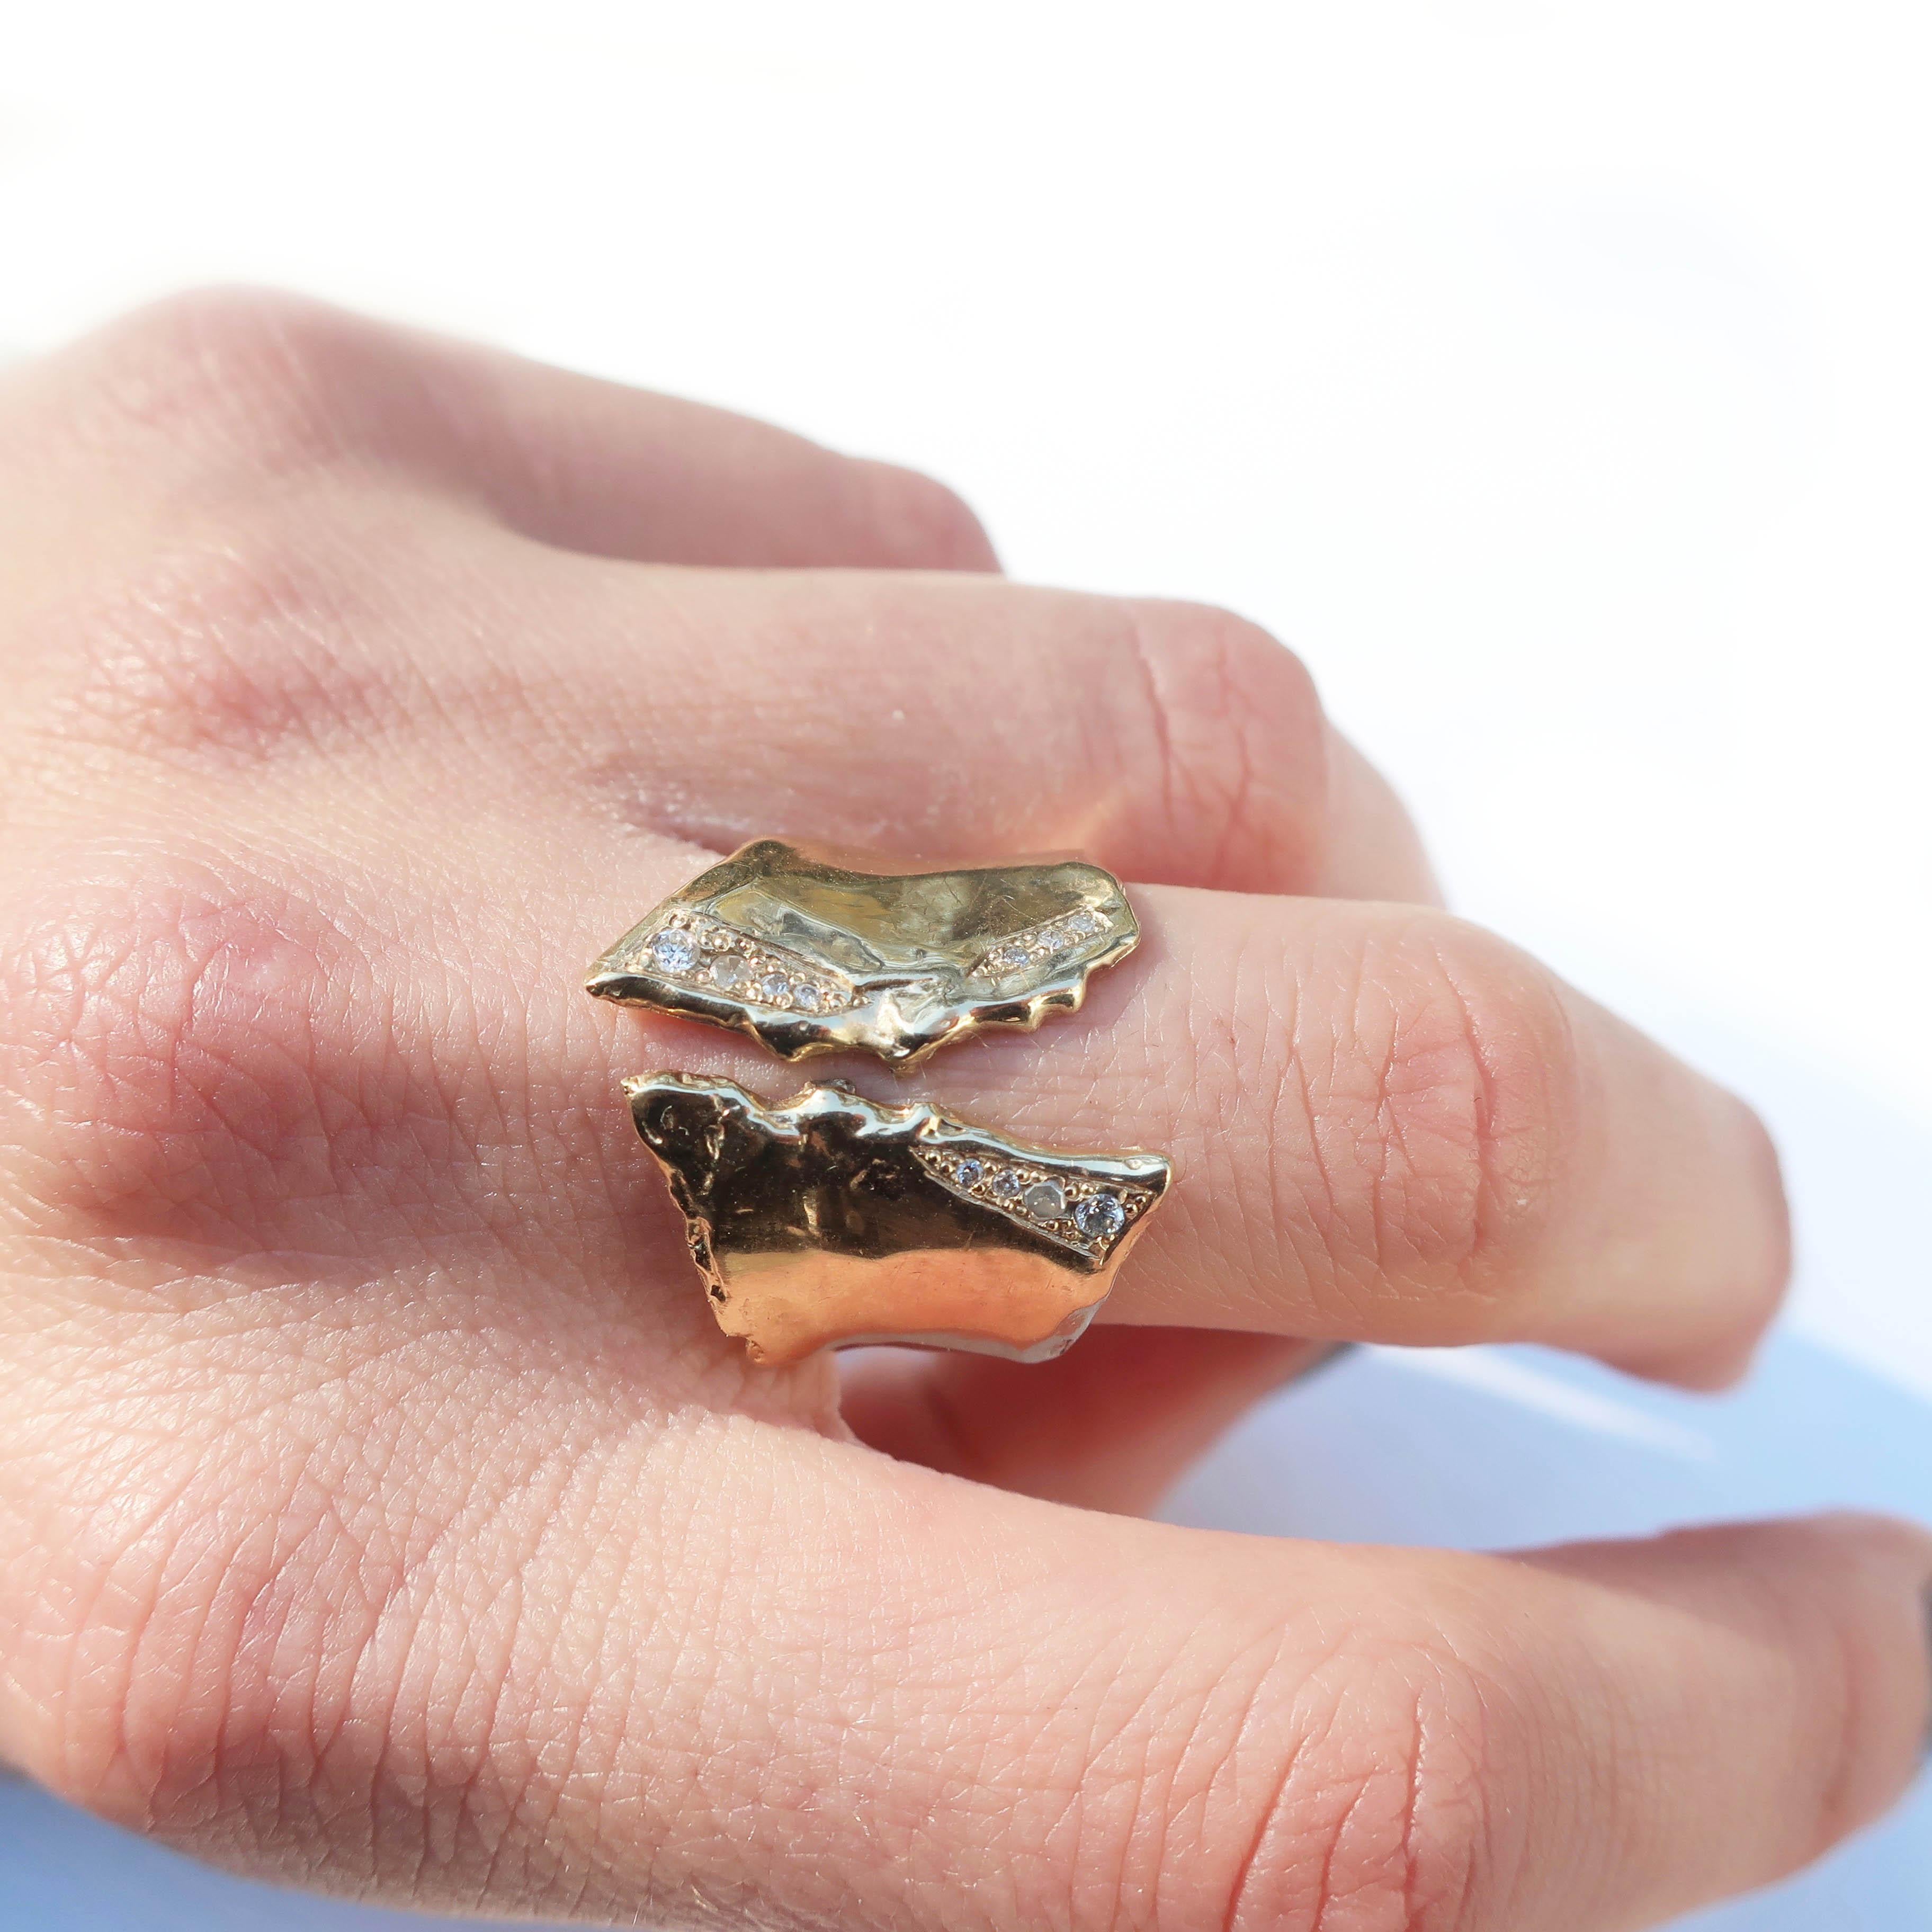 This ring was hand carved and cast in solid 14k gold with pave crushed ice diamonds. A slight concave shape, as well as the split shank style, make for an extremely comfortable and slightly flexible fit. This unisex style tappers to the back for